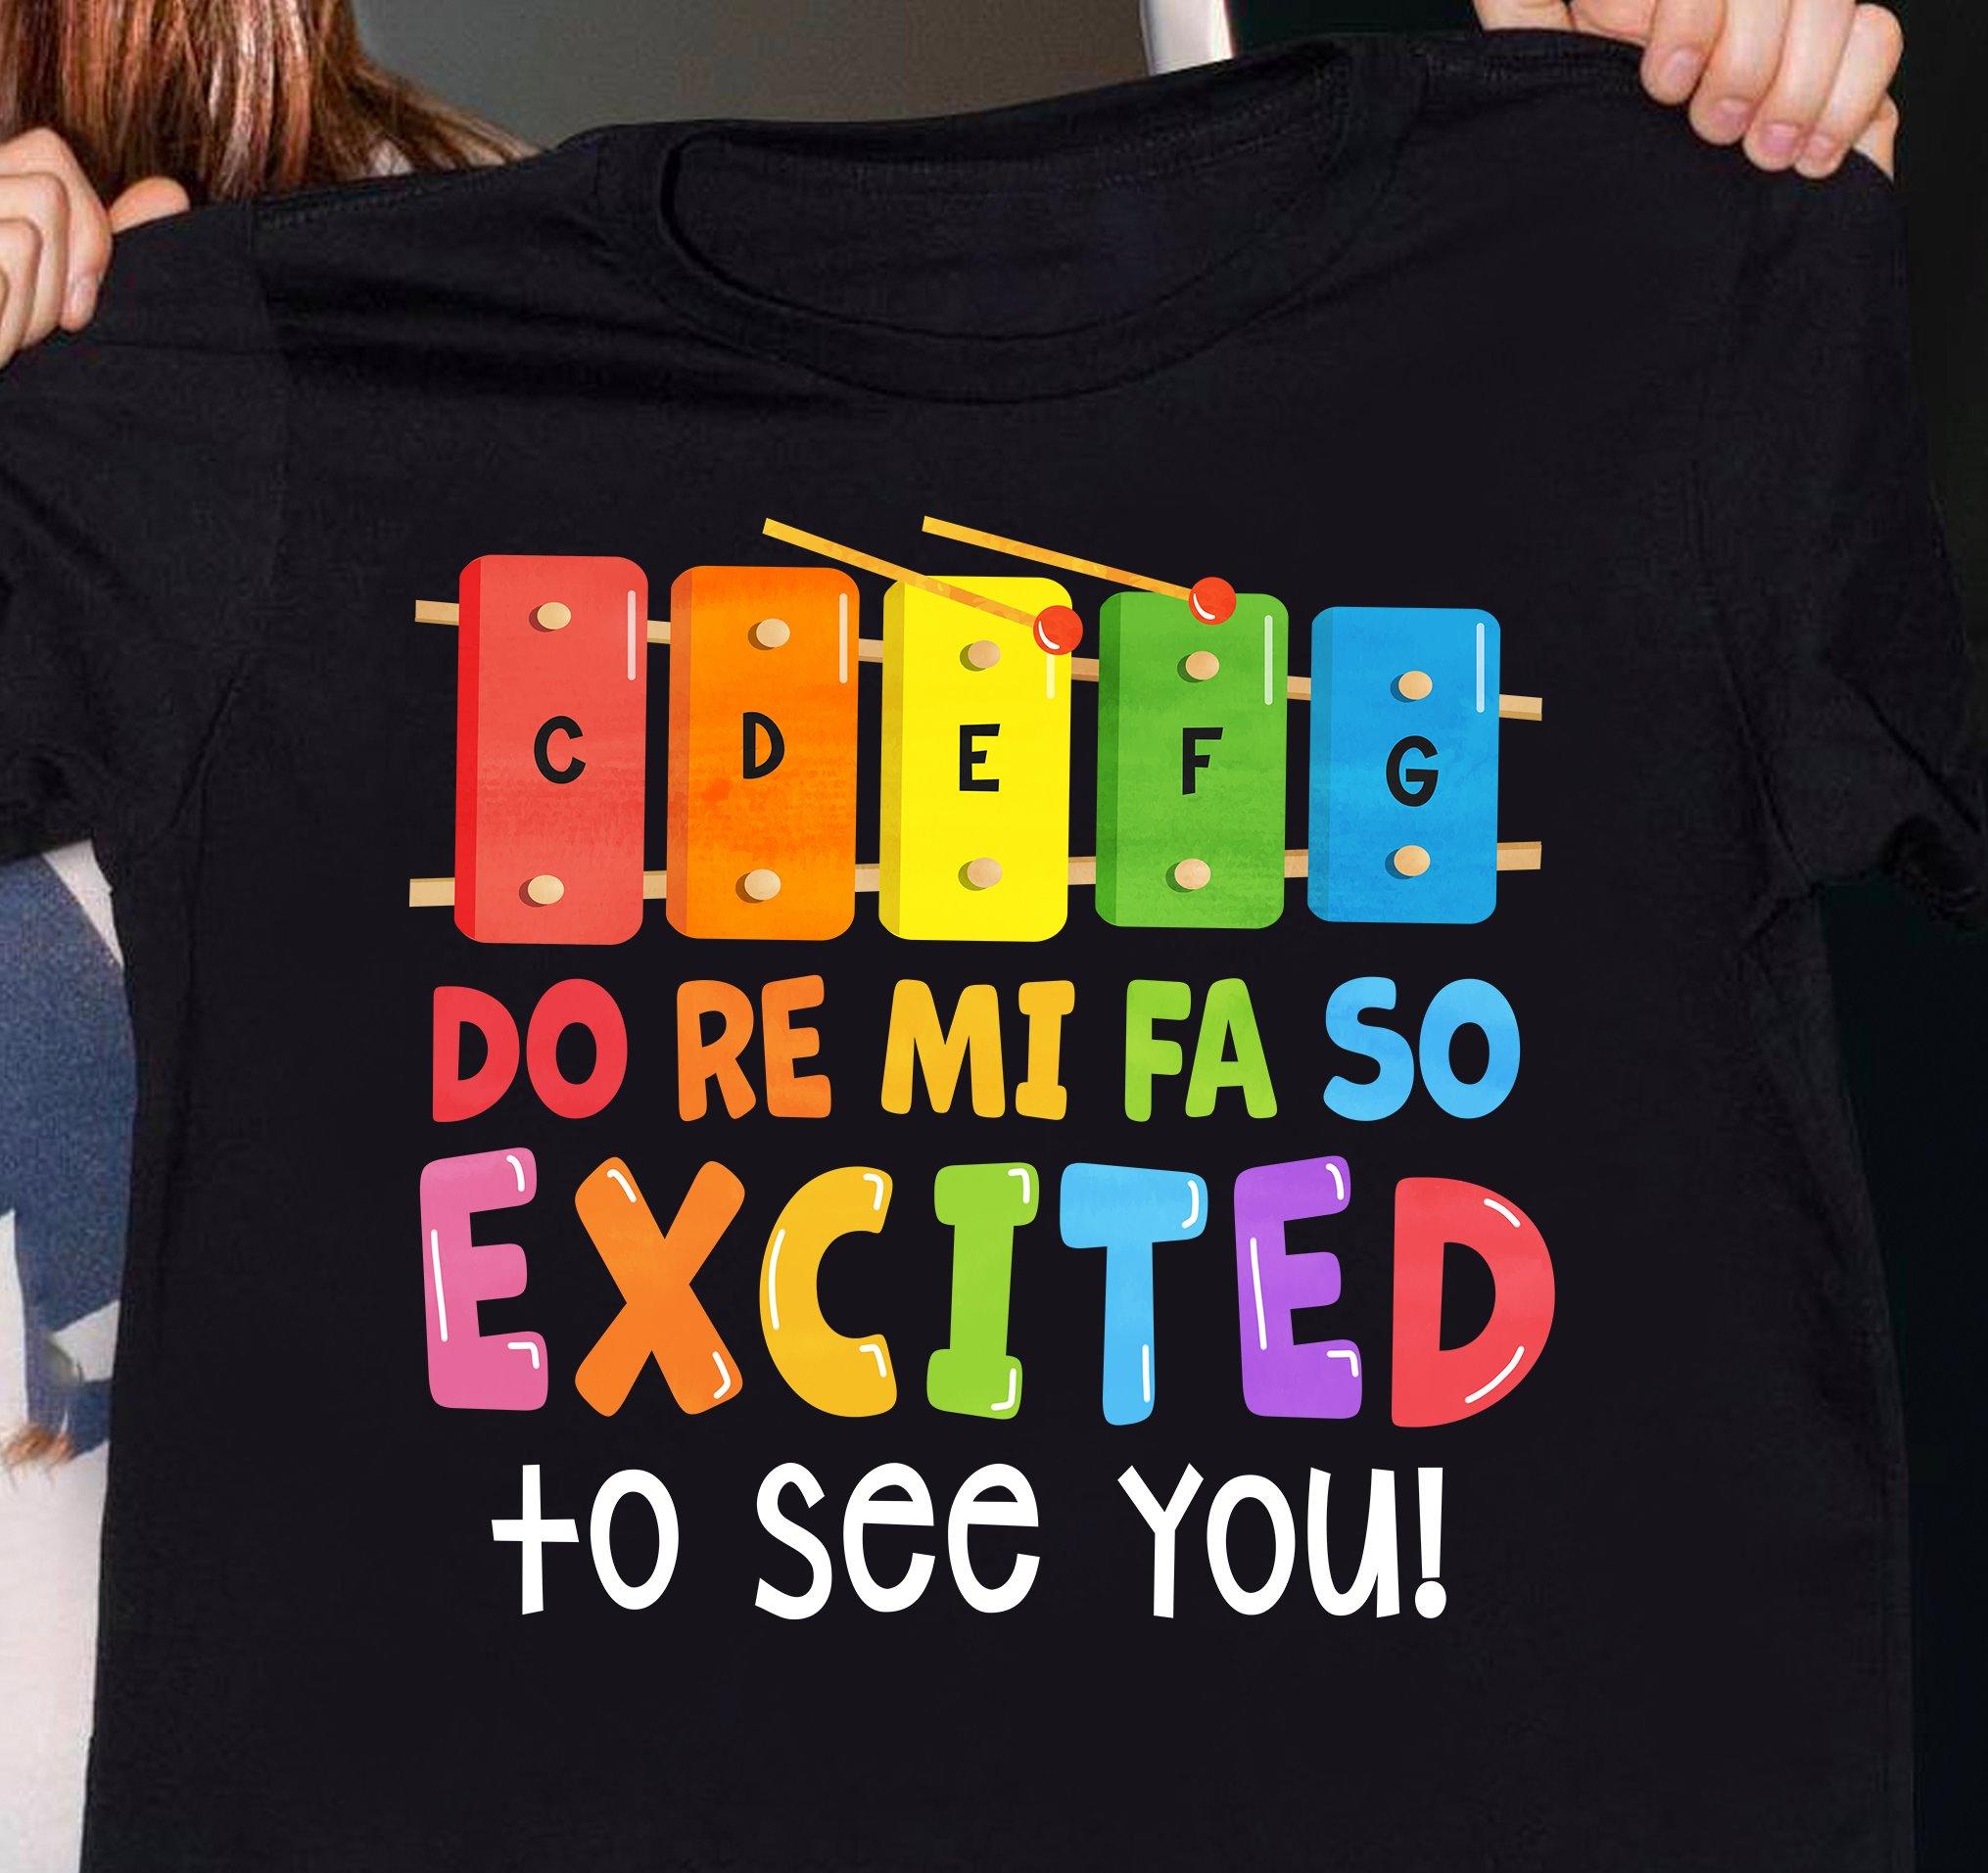 Do re mi fa so excited to see you - Lgbt community gift, gift for lgbt people